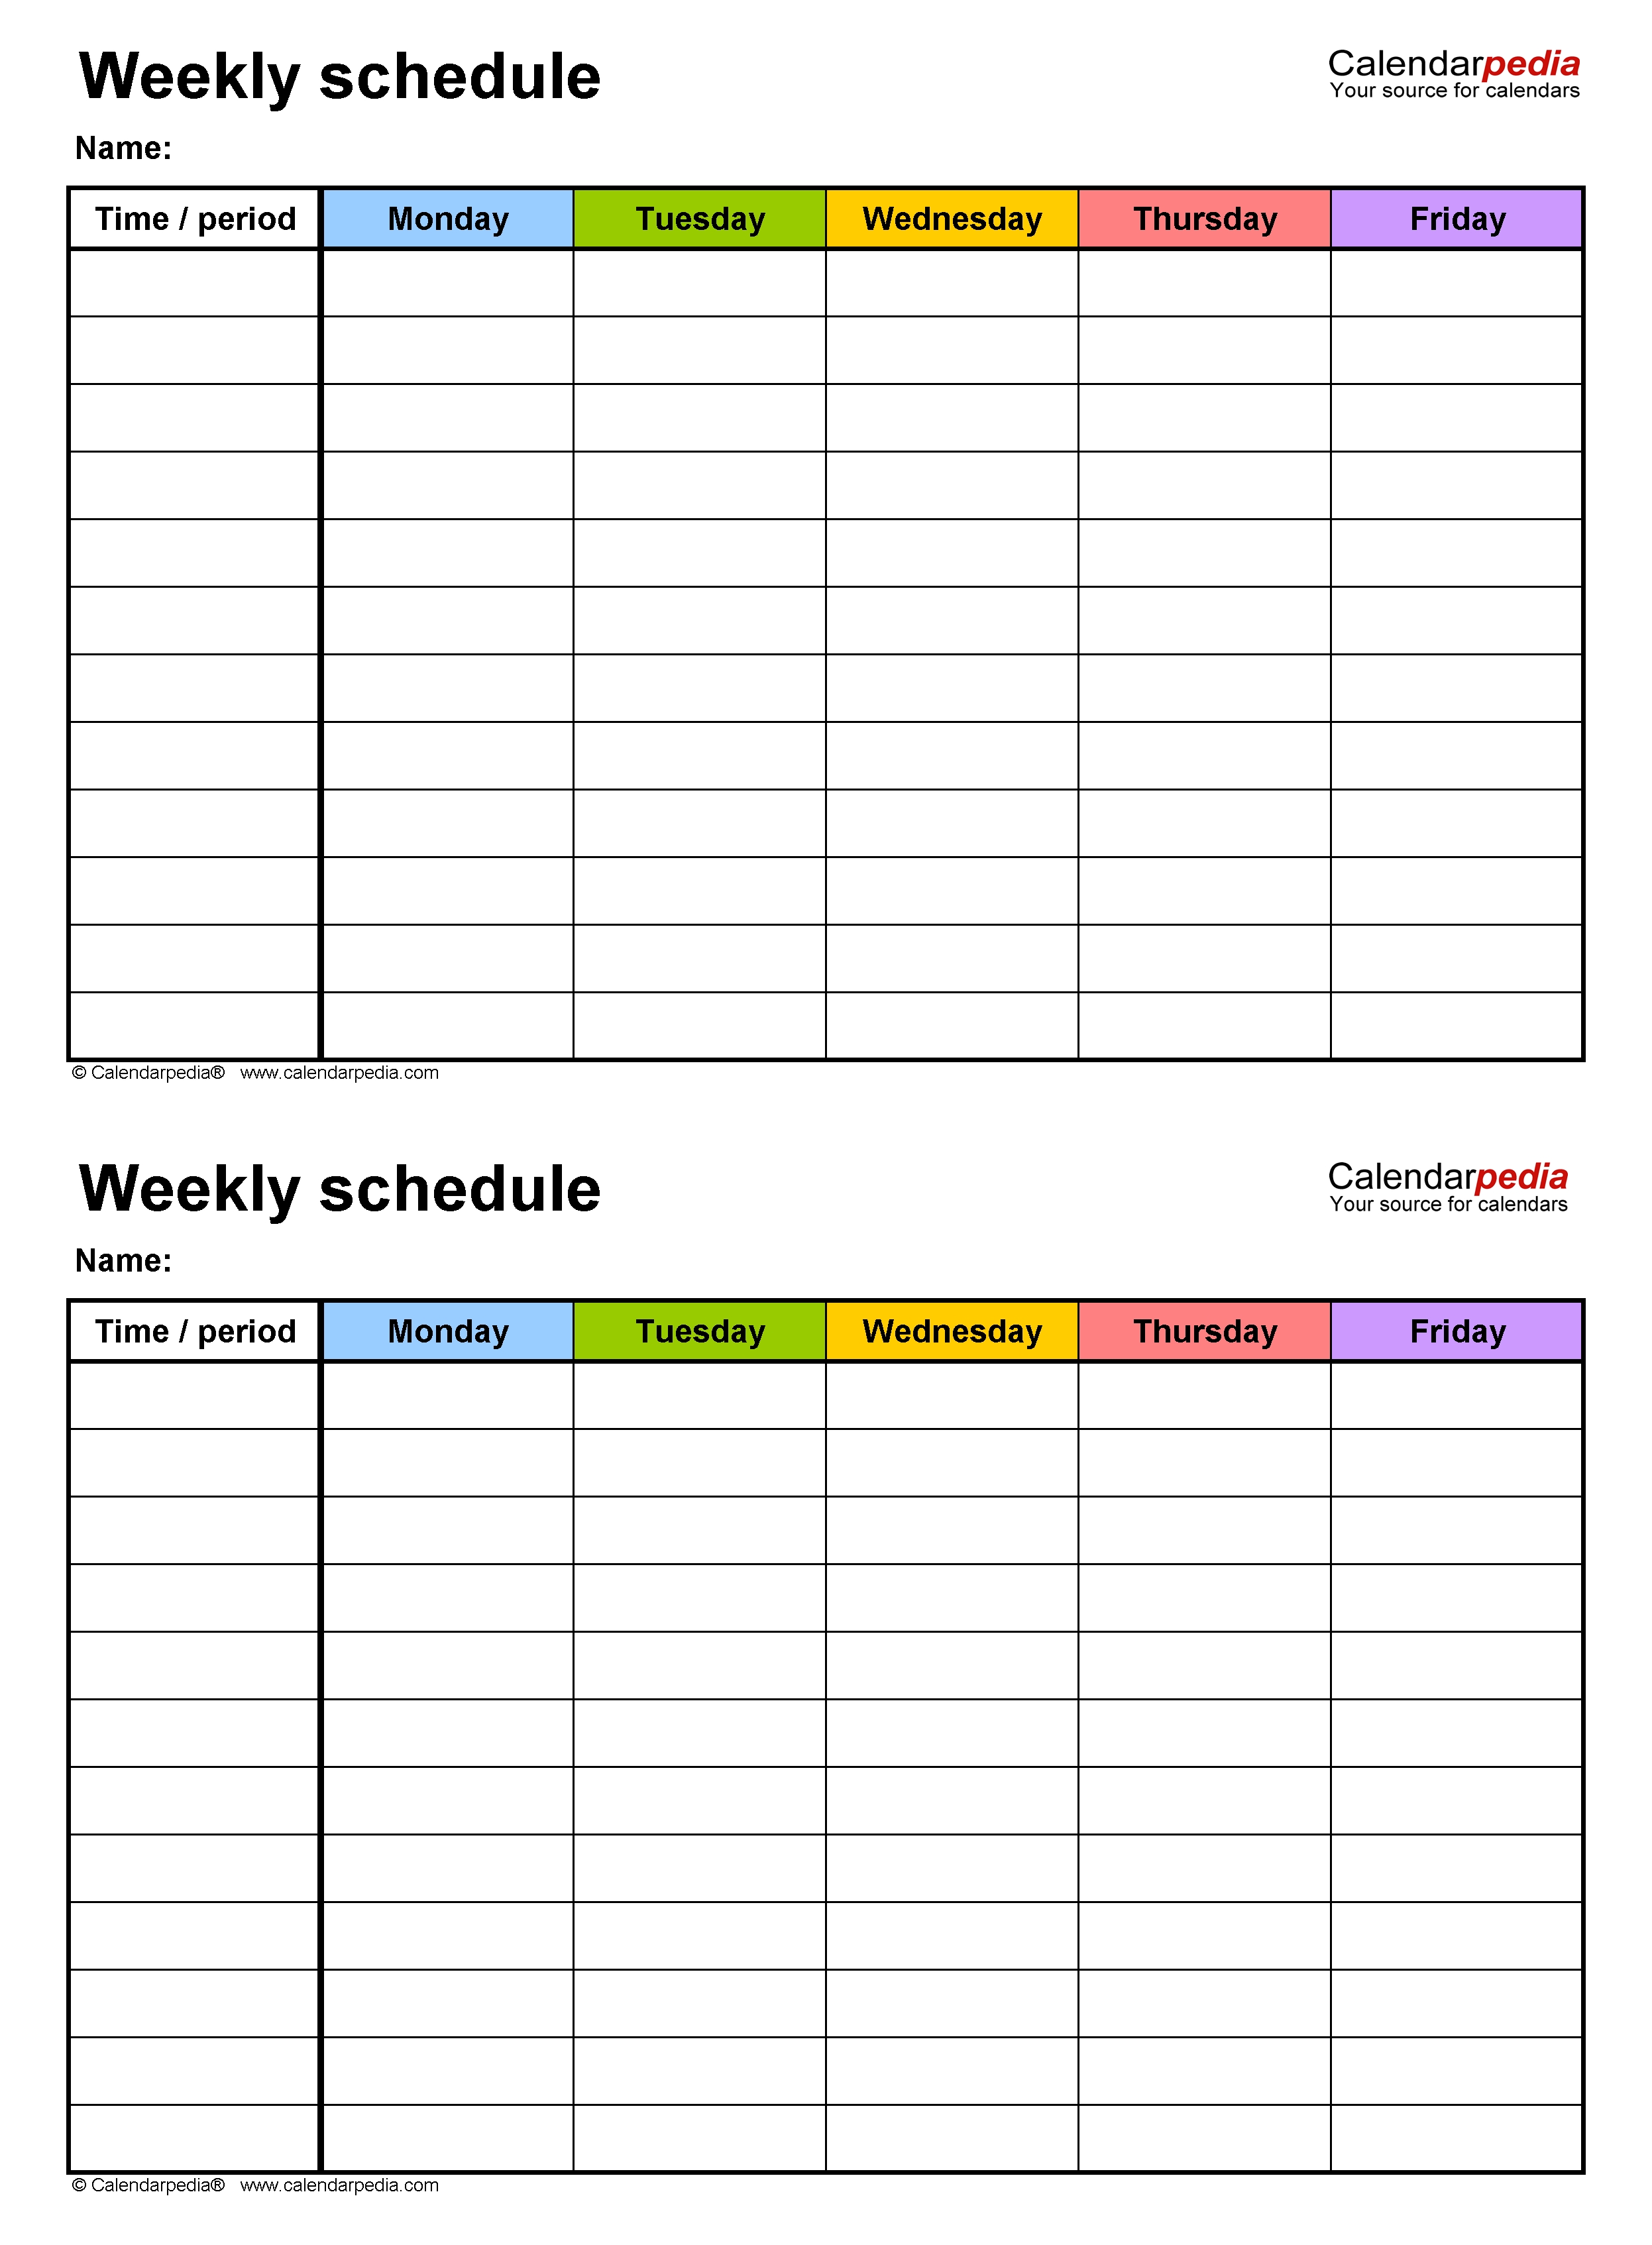 How To Monday Friday 9 5 Schedule Get Your Calendar Printable